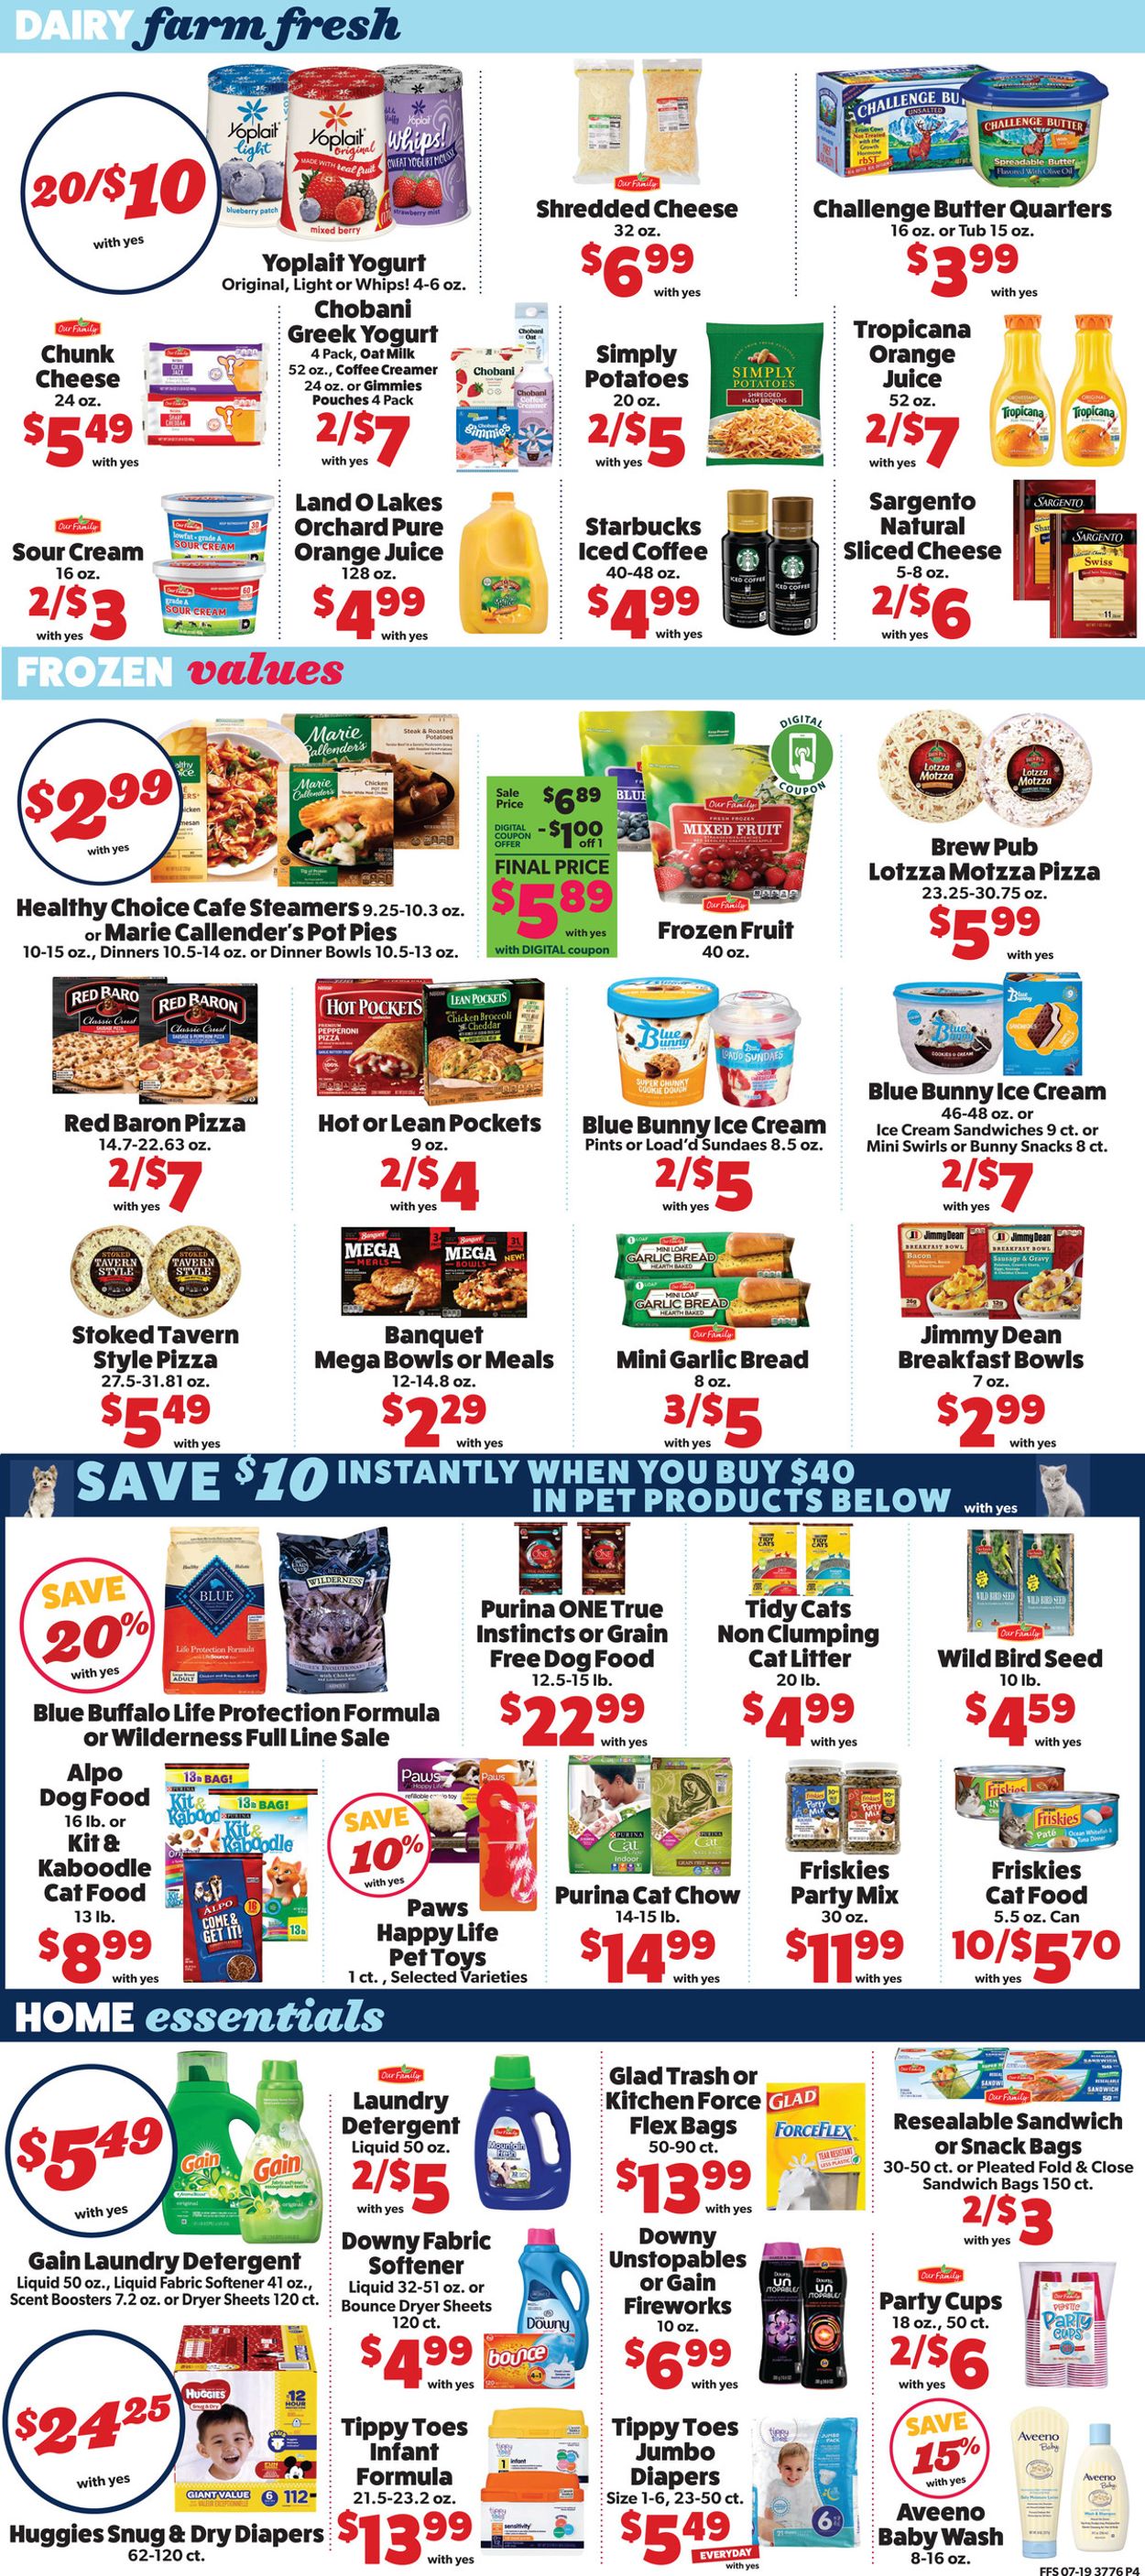 Family Fare Current weekly ad 07/22 - 07/28/2020 [6] - frequent-ads.com